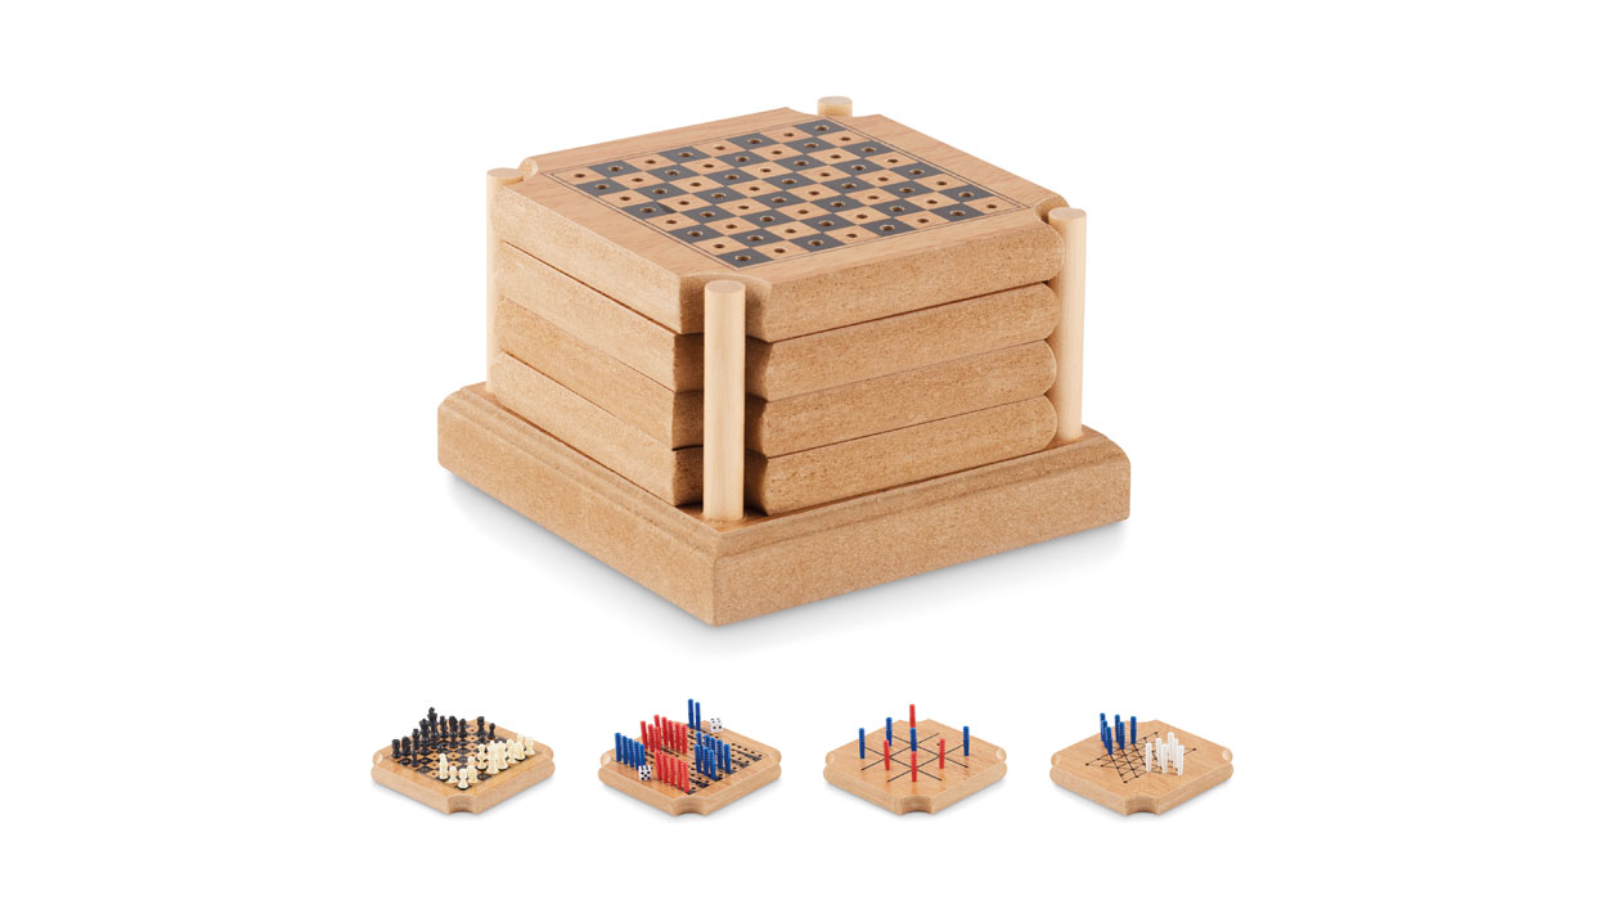 <p>Midocean’s Coastgame, set of 4 cork and MDF coasters with games: Tic-Tac-Toe, backgammon, chess and Chinese checkers</p>
